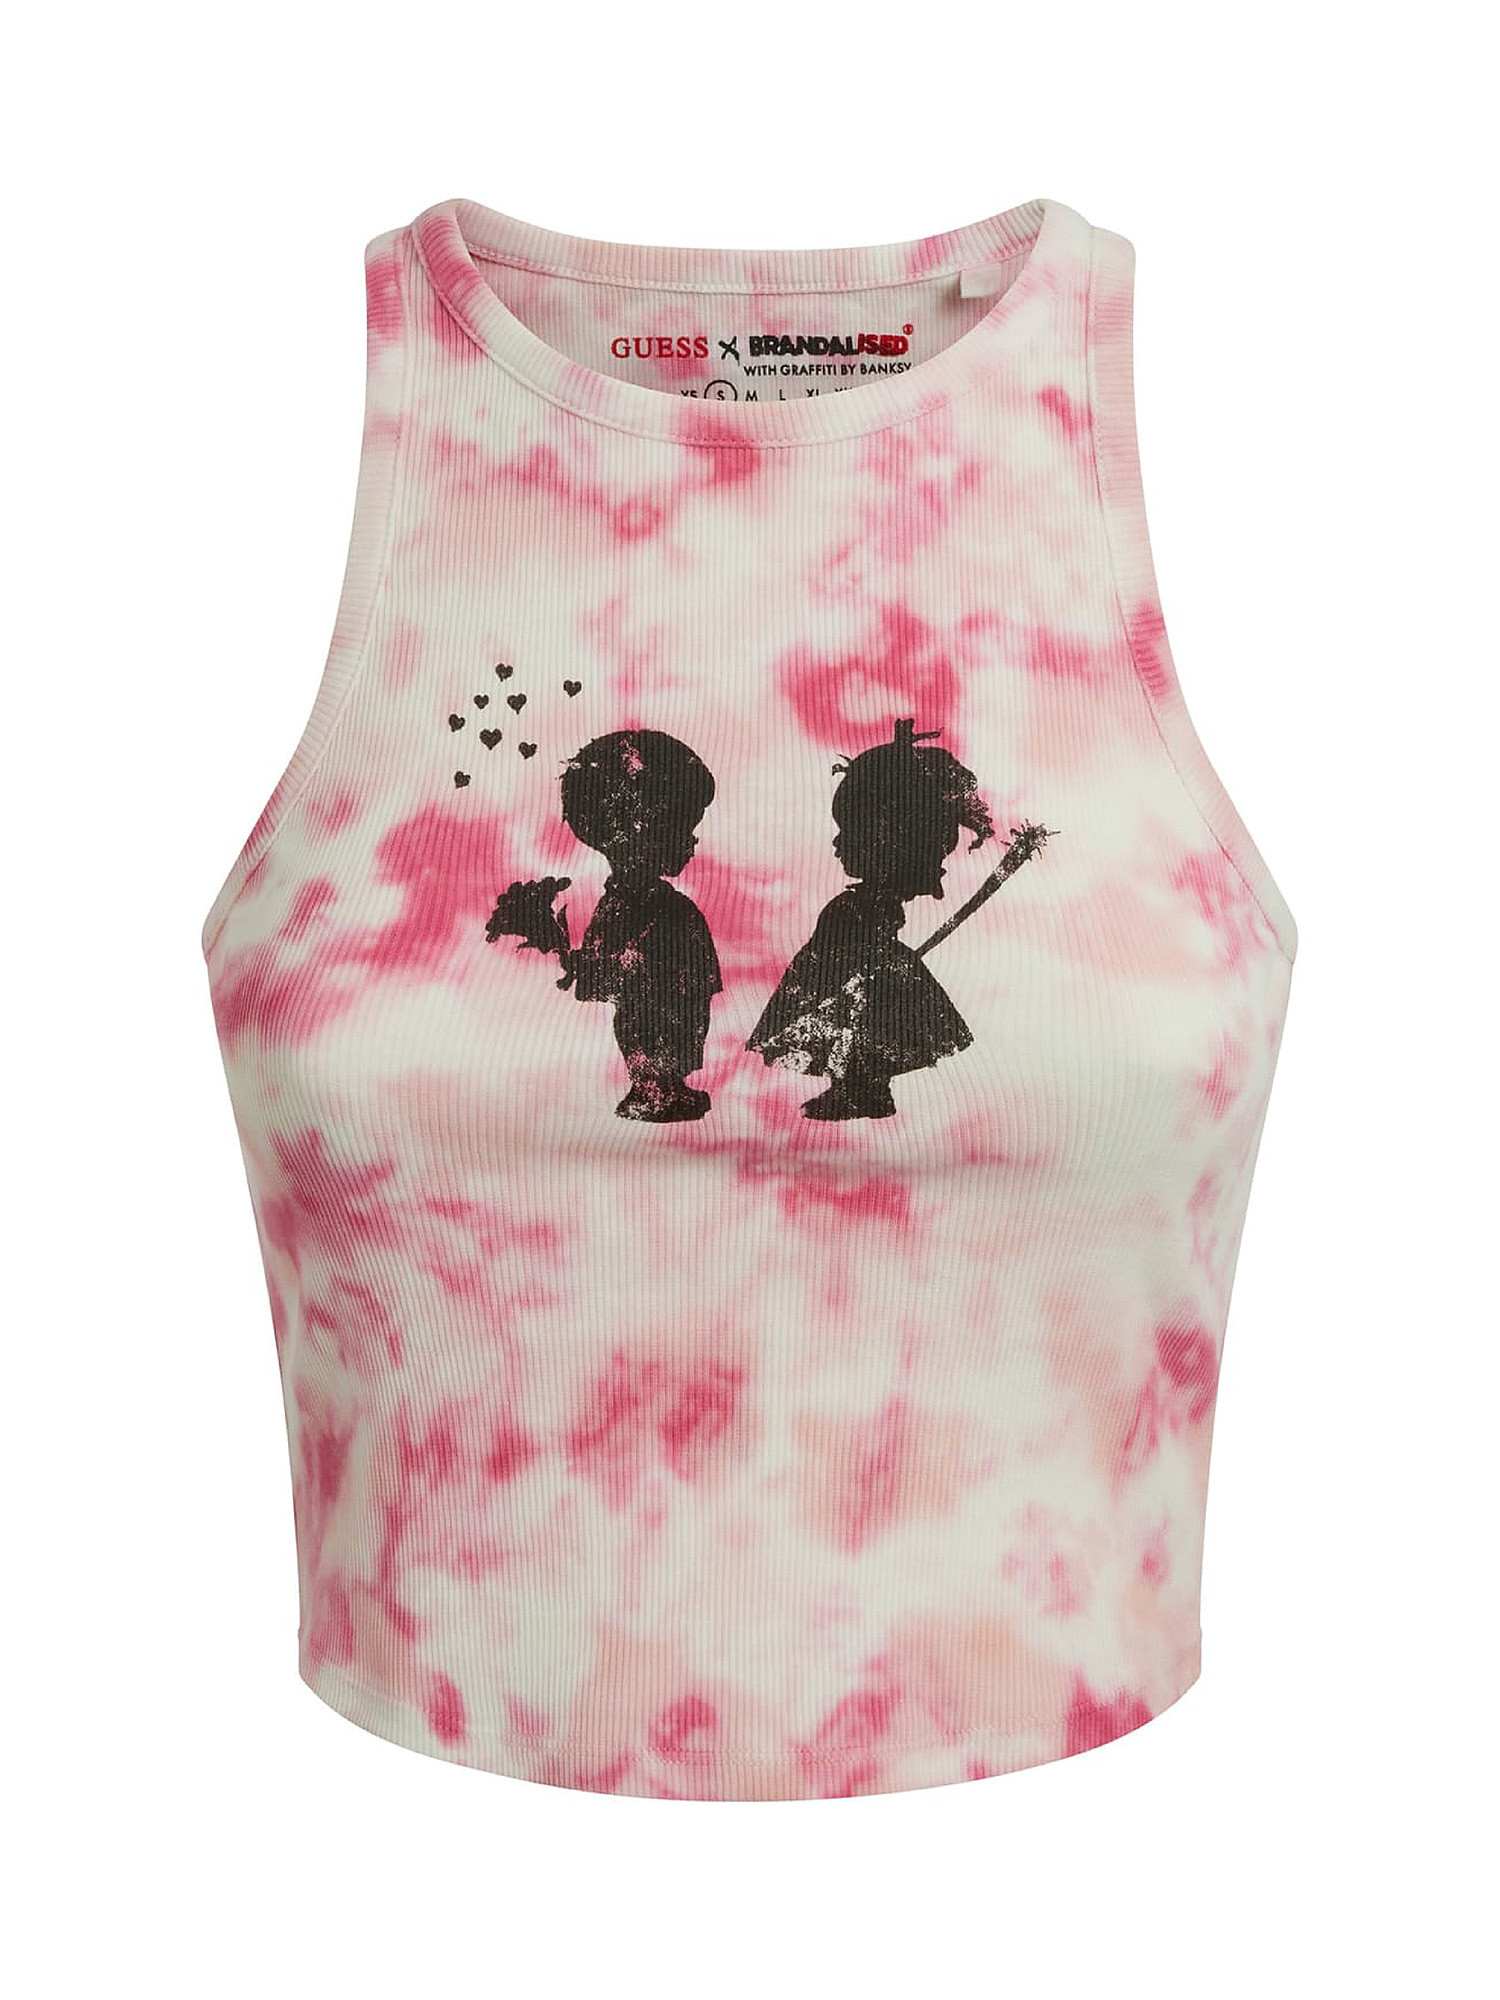 GUESS - Tie-dye tank top, Pink, large image number 0